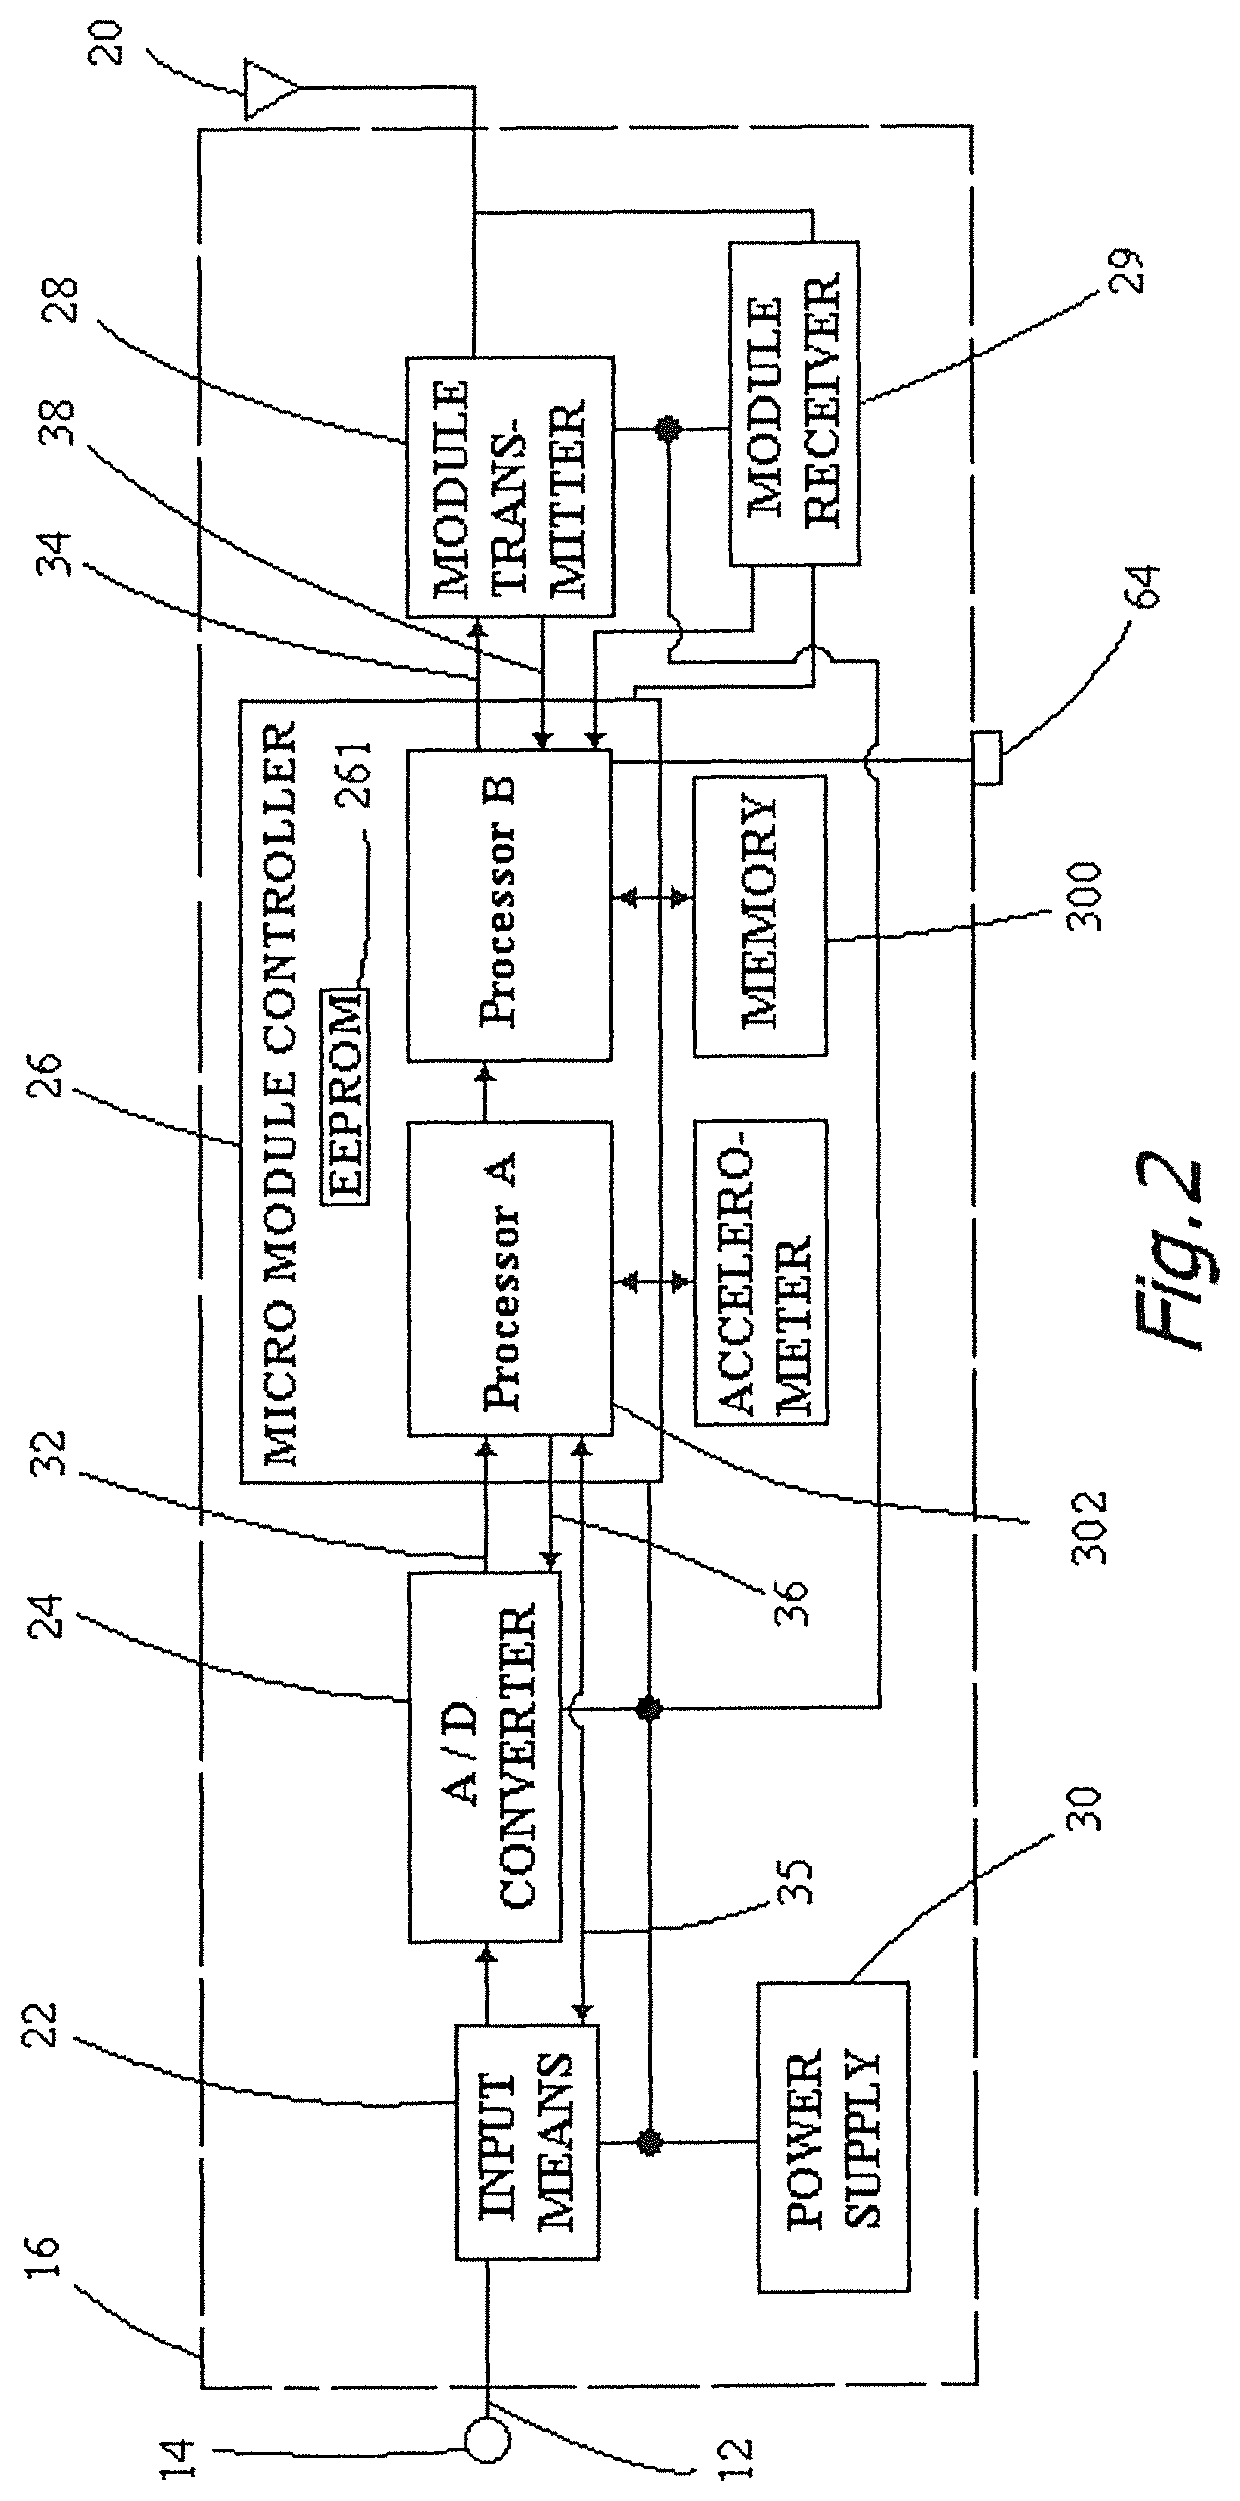 Wireless data acquisition system with novel features